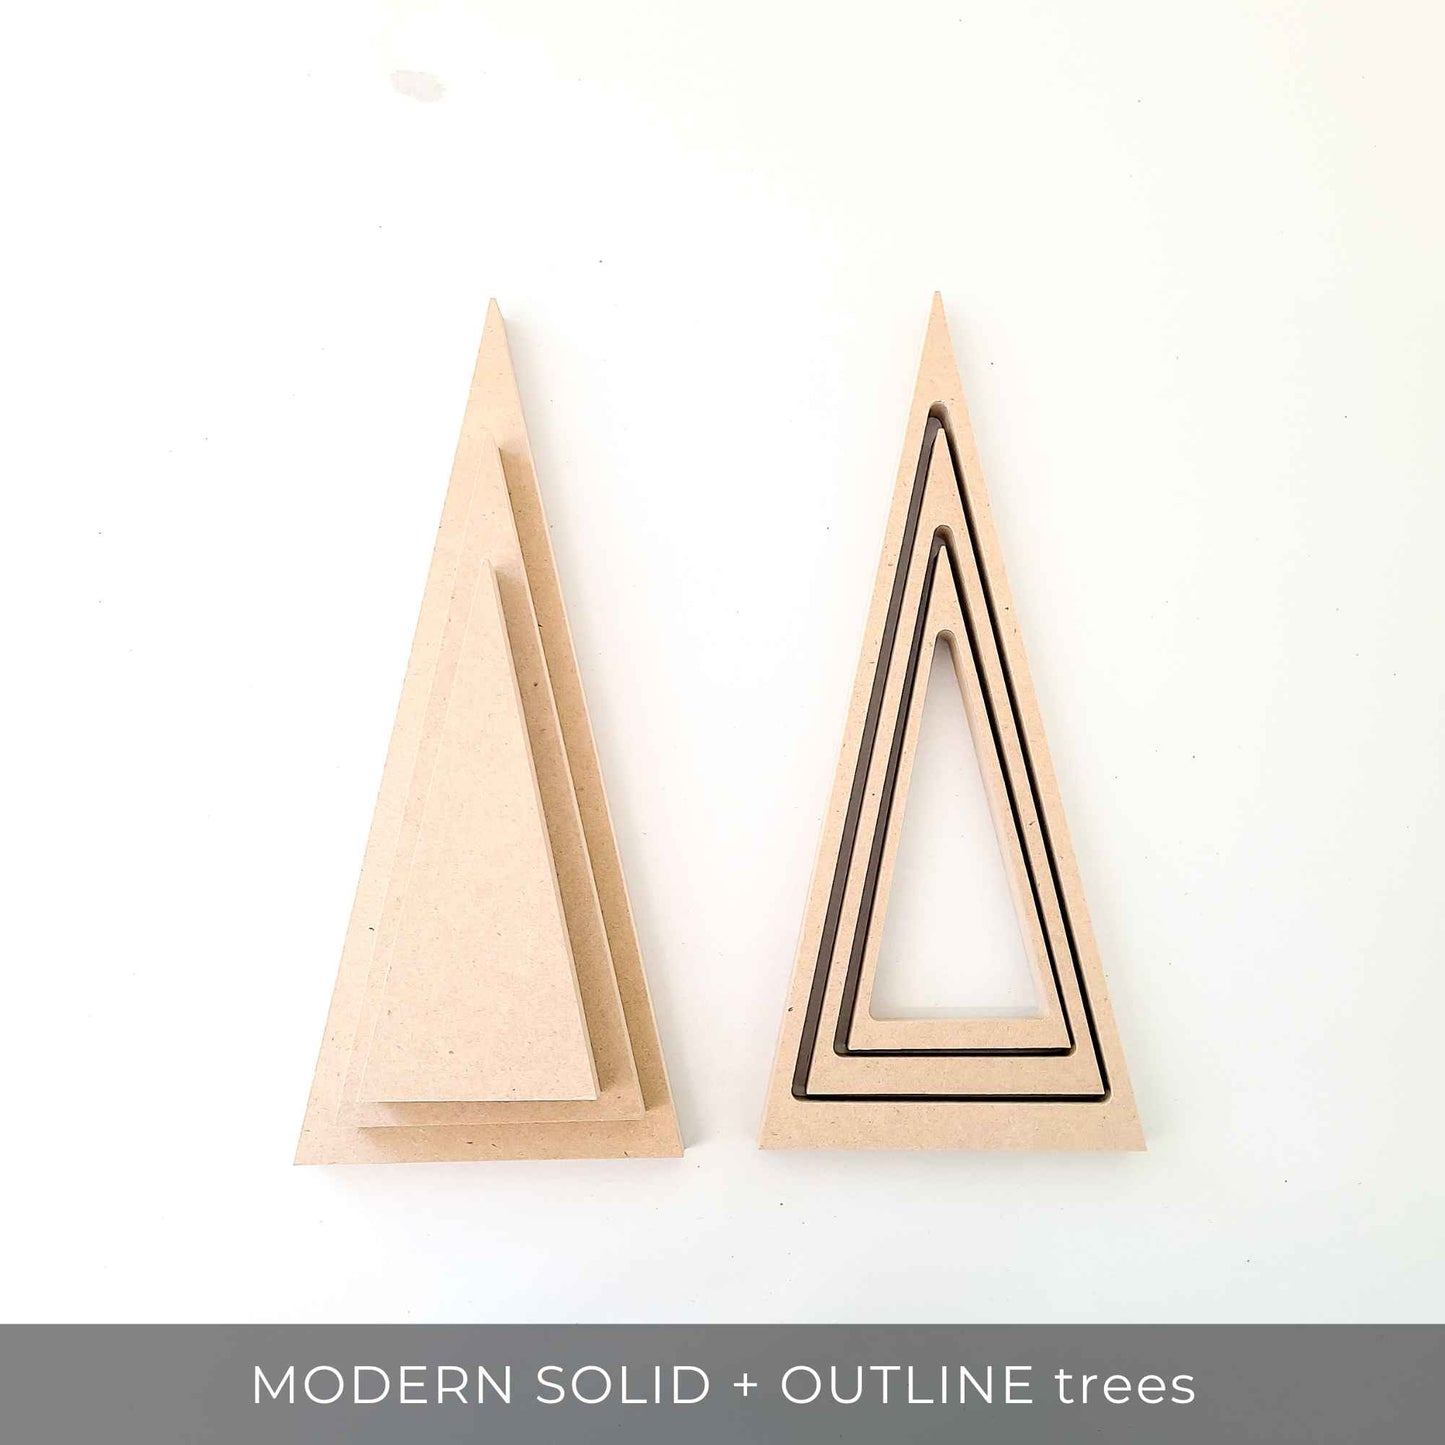 Modern solid and modern outline tree sets